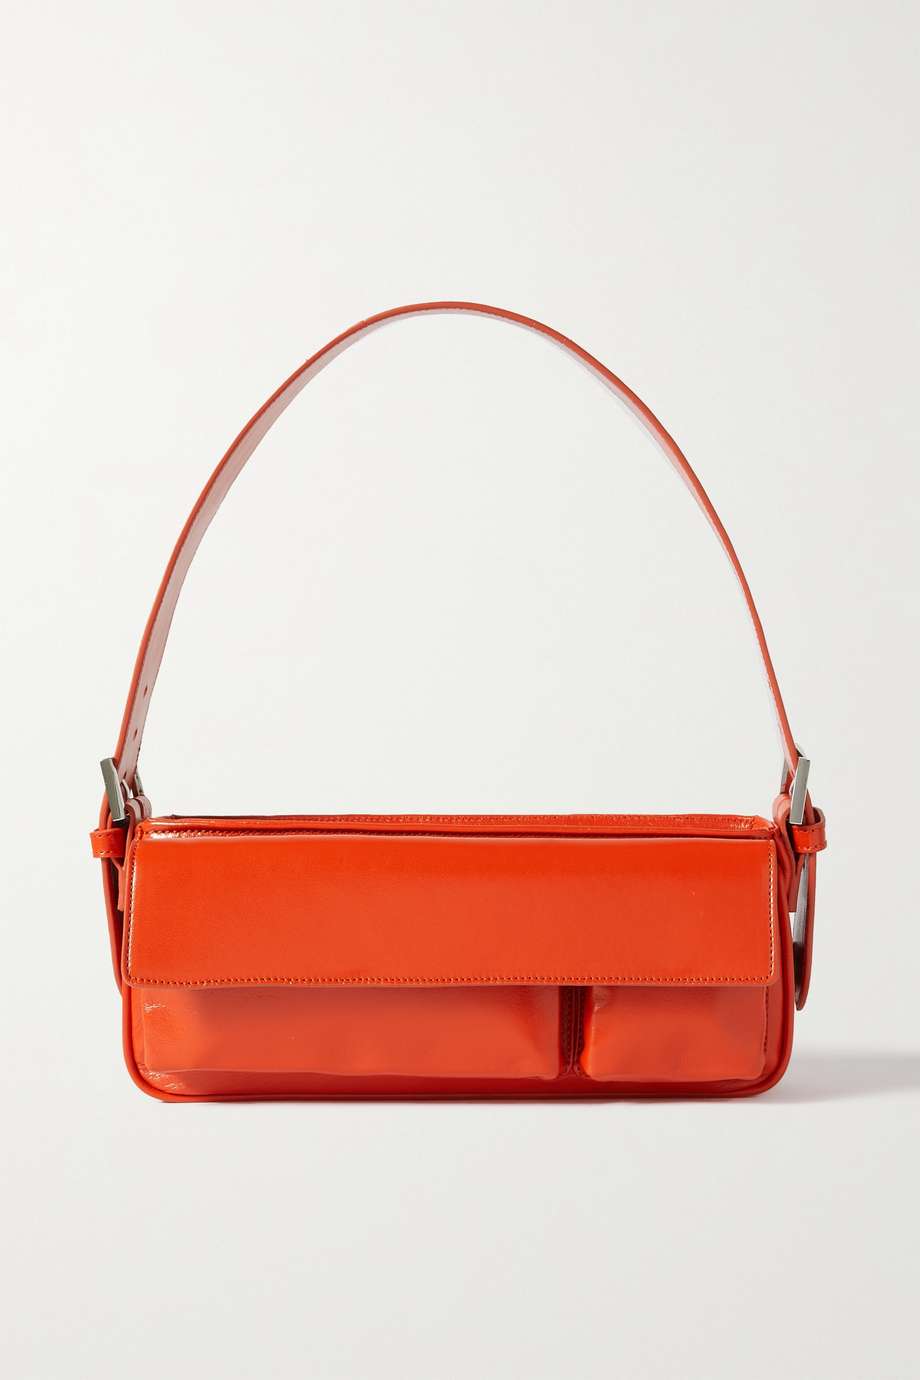 By Far + Mimi Cuttrell Glossed-Leather Shoulder Bag